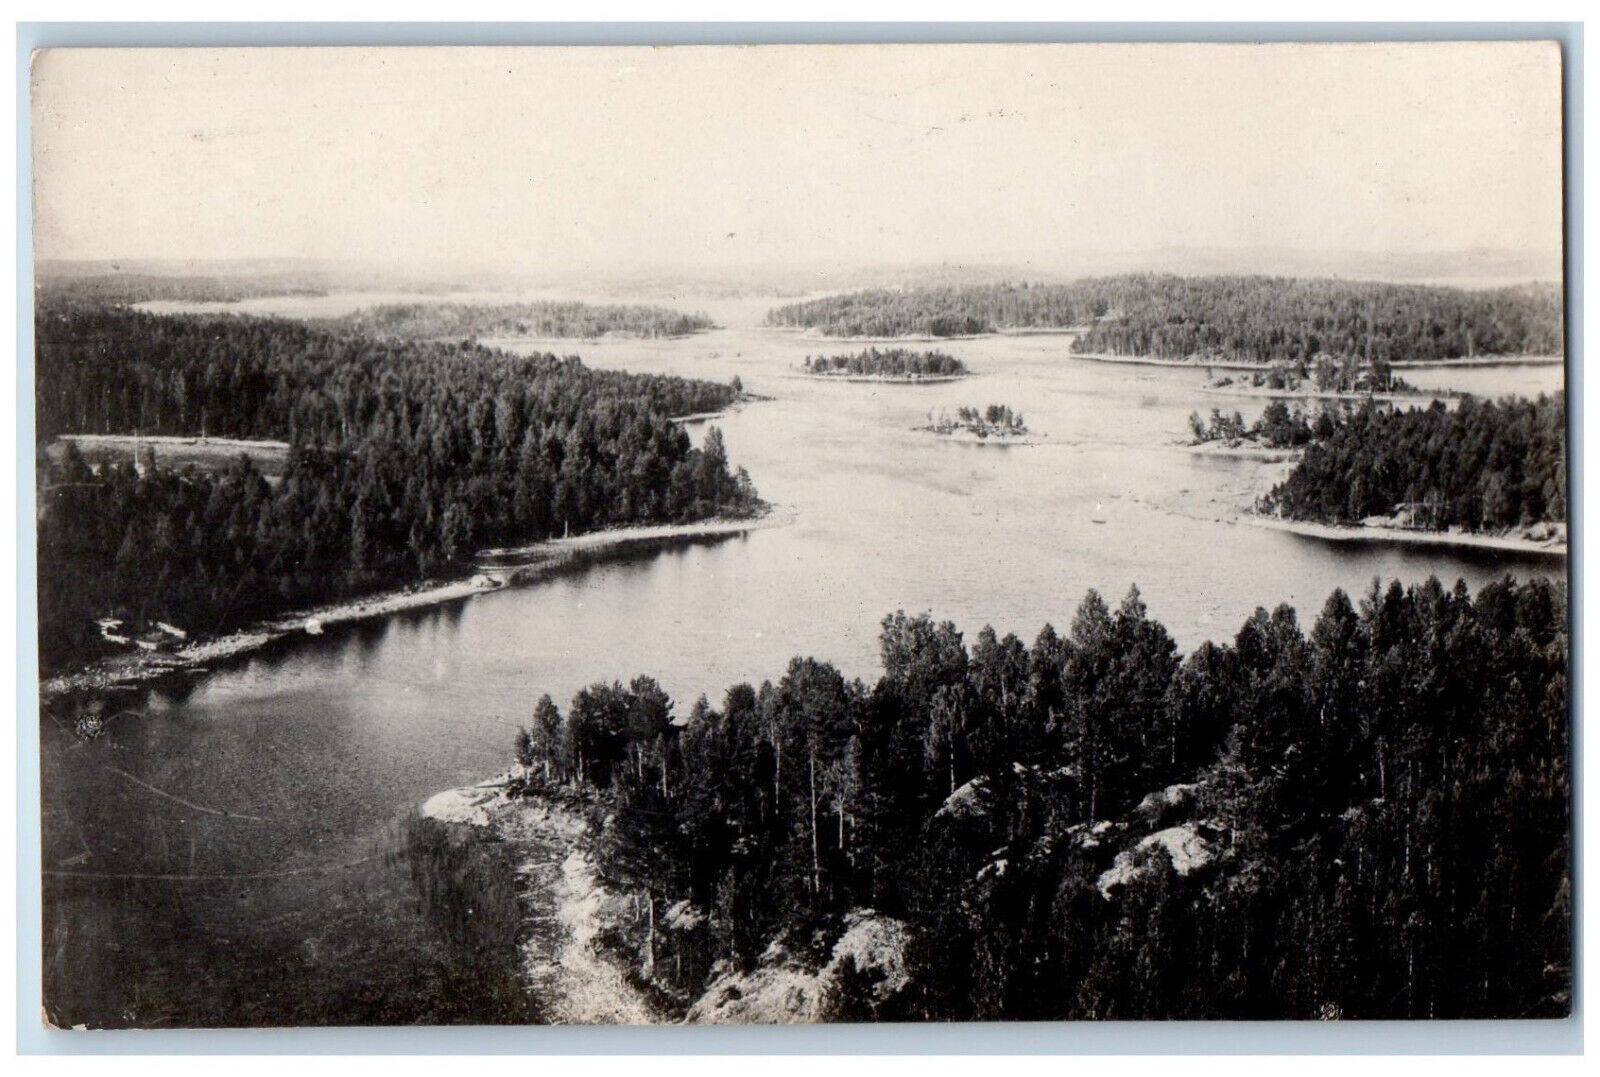 Tammerfors (Tampere) Finland Postcard Forest River Scene 1927 Vintage RPPC Photo